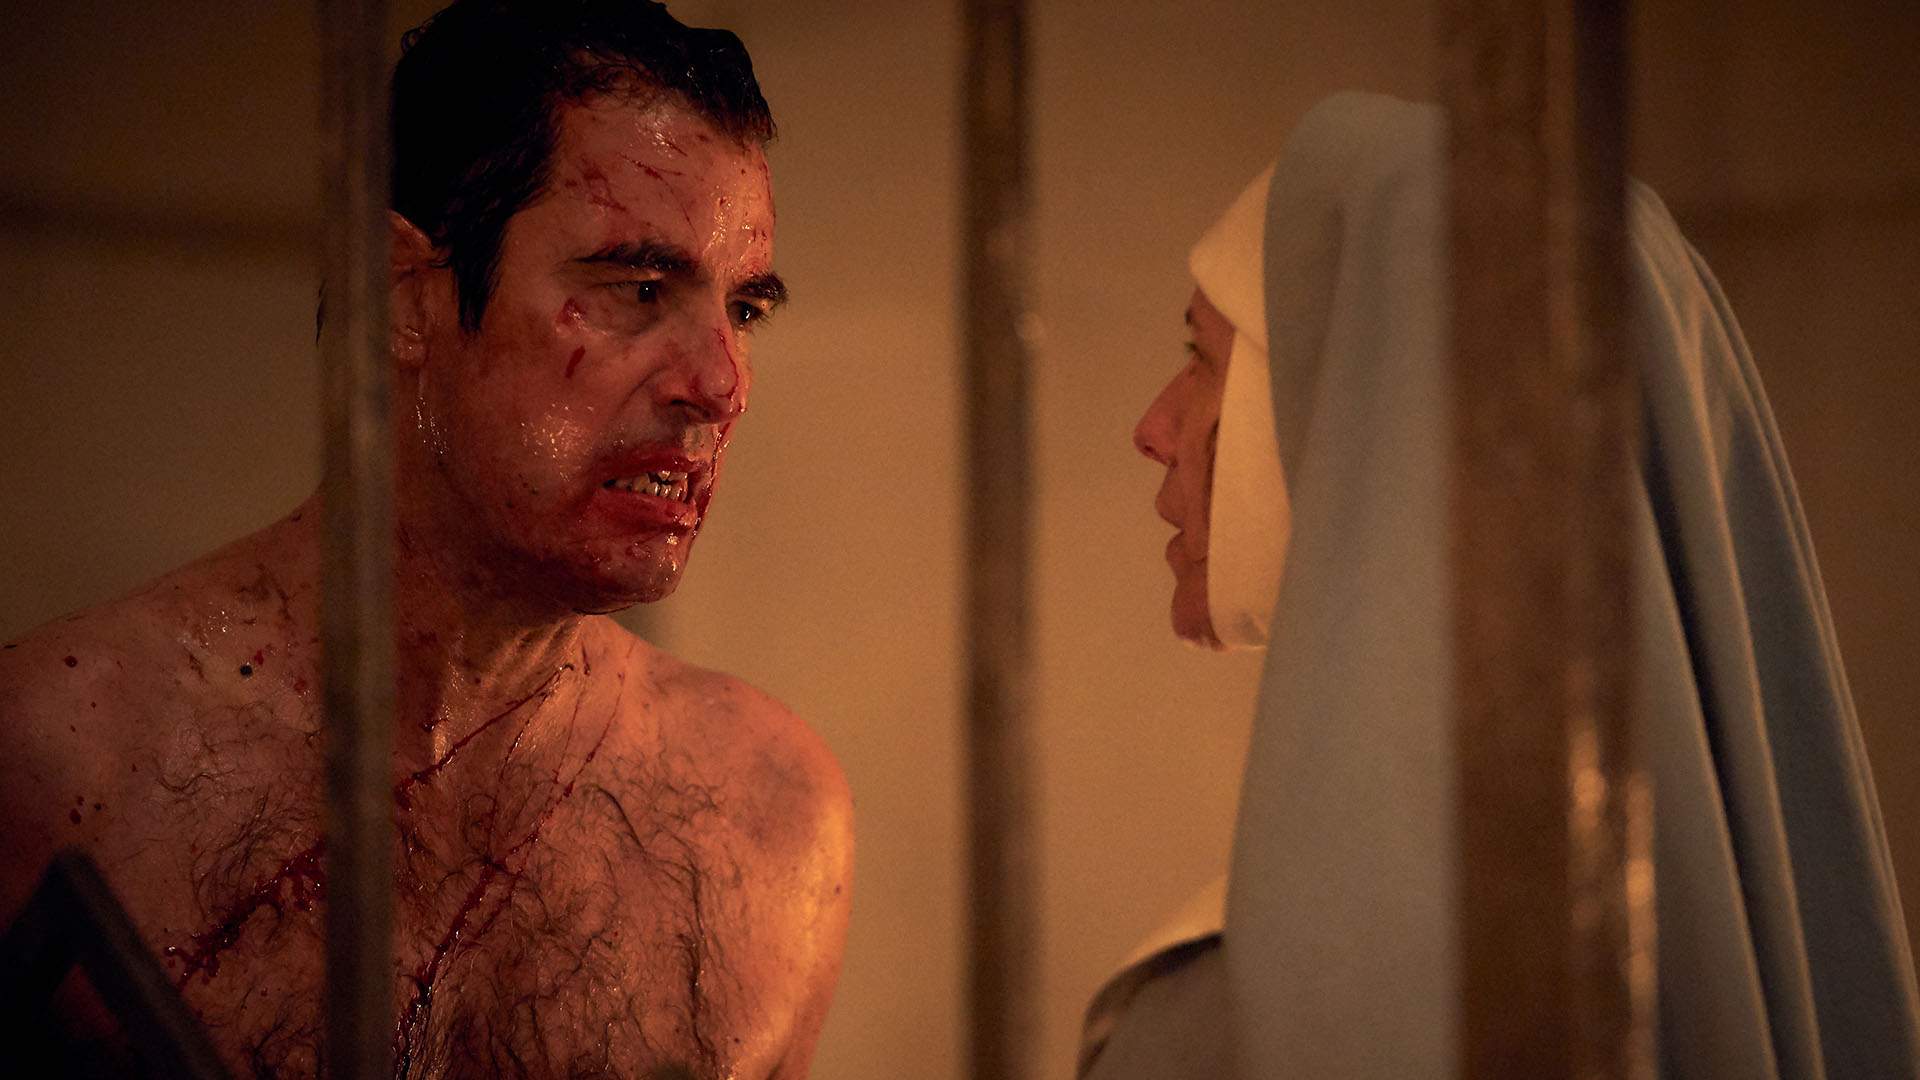 Netflix Sinks Its Teeth Into a Gothic Horror Classic In the Bloody and Brooding Trailer for 'Dracula'